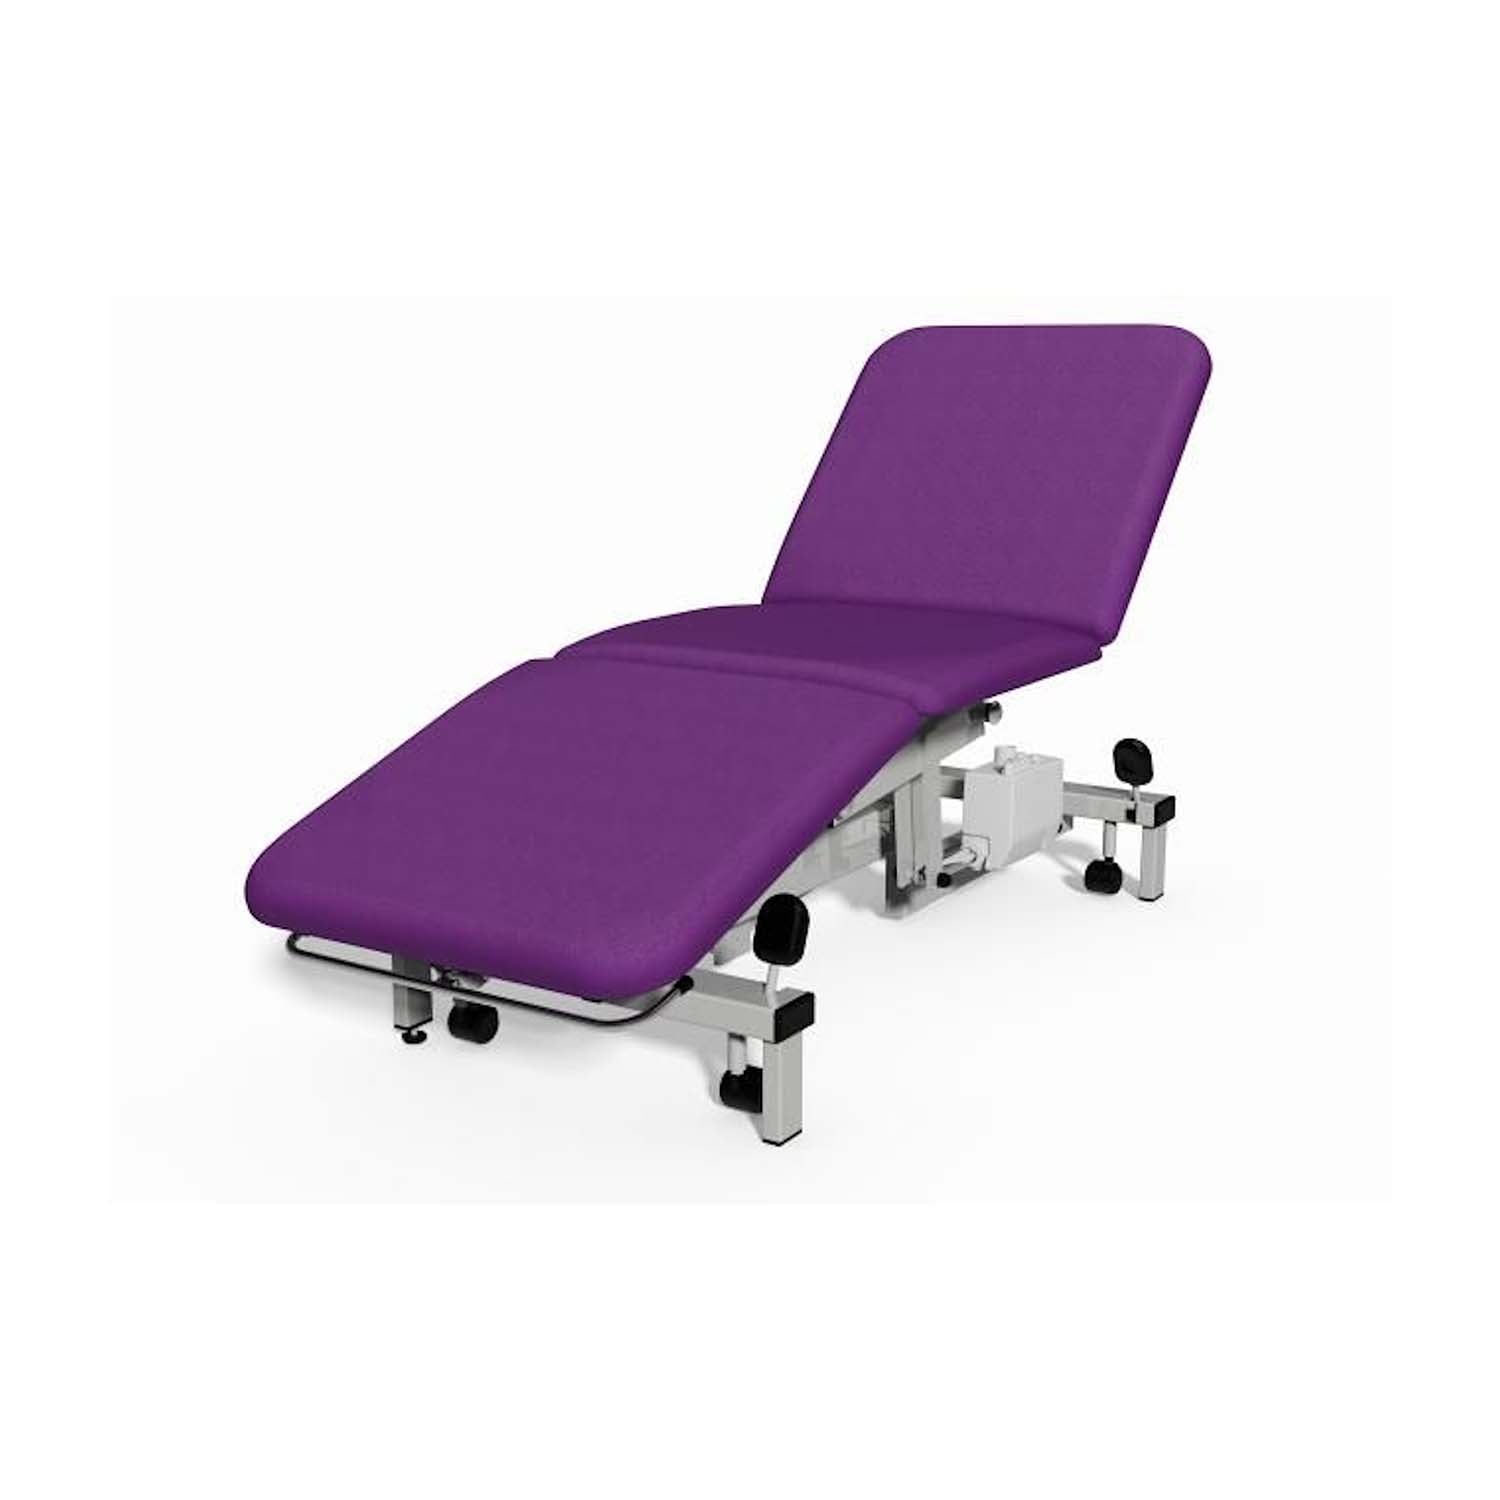 Plinth 2000 Model 503 3 Section Examination Couch | Hydraulic | Grape